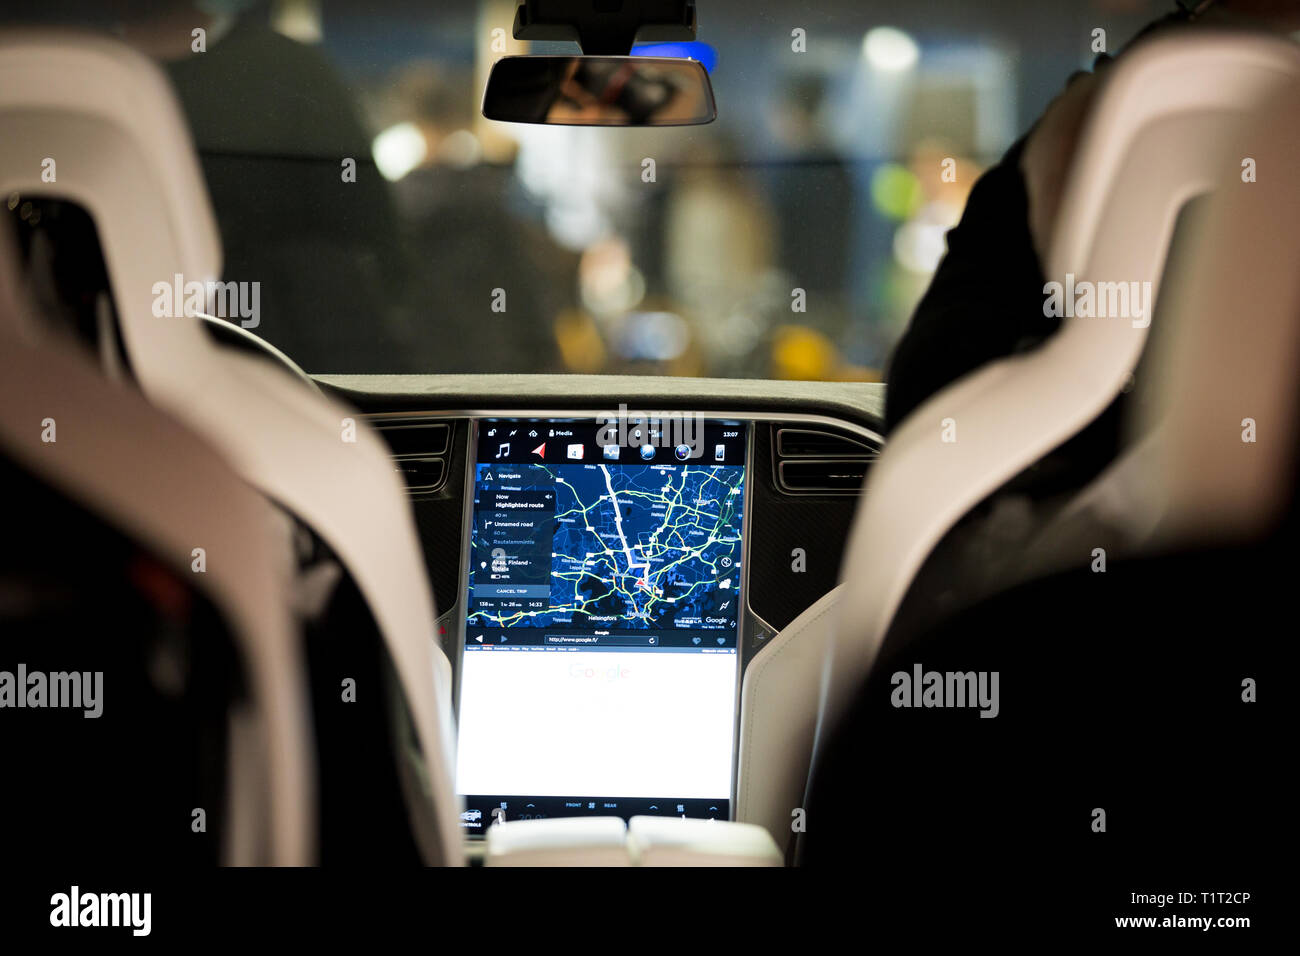 HELSINKI, FINLAND - NOVEMBER 04, 2016: The interior of a Tesla Model X electric car with large touch screen dashboard.  Seats. Stock Photo